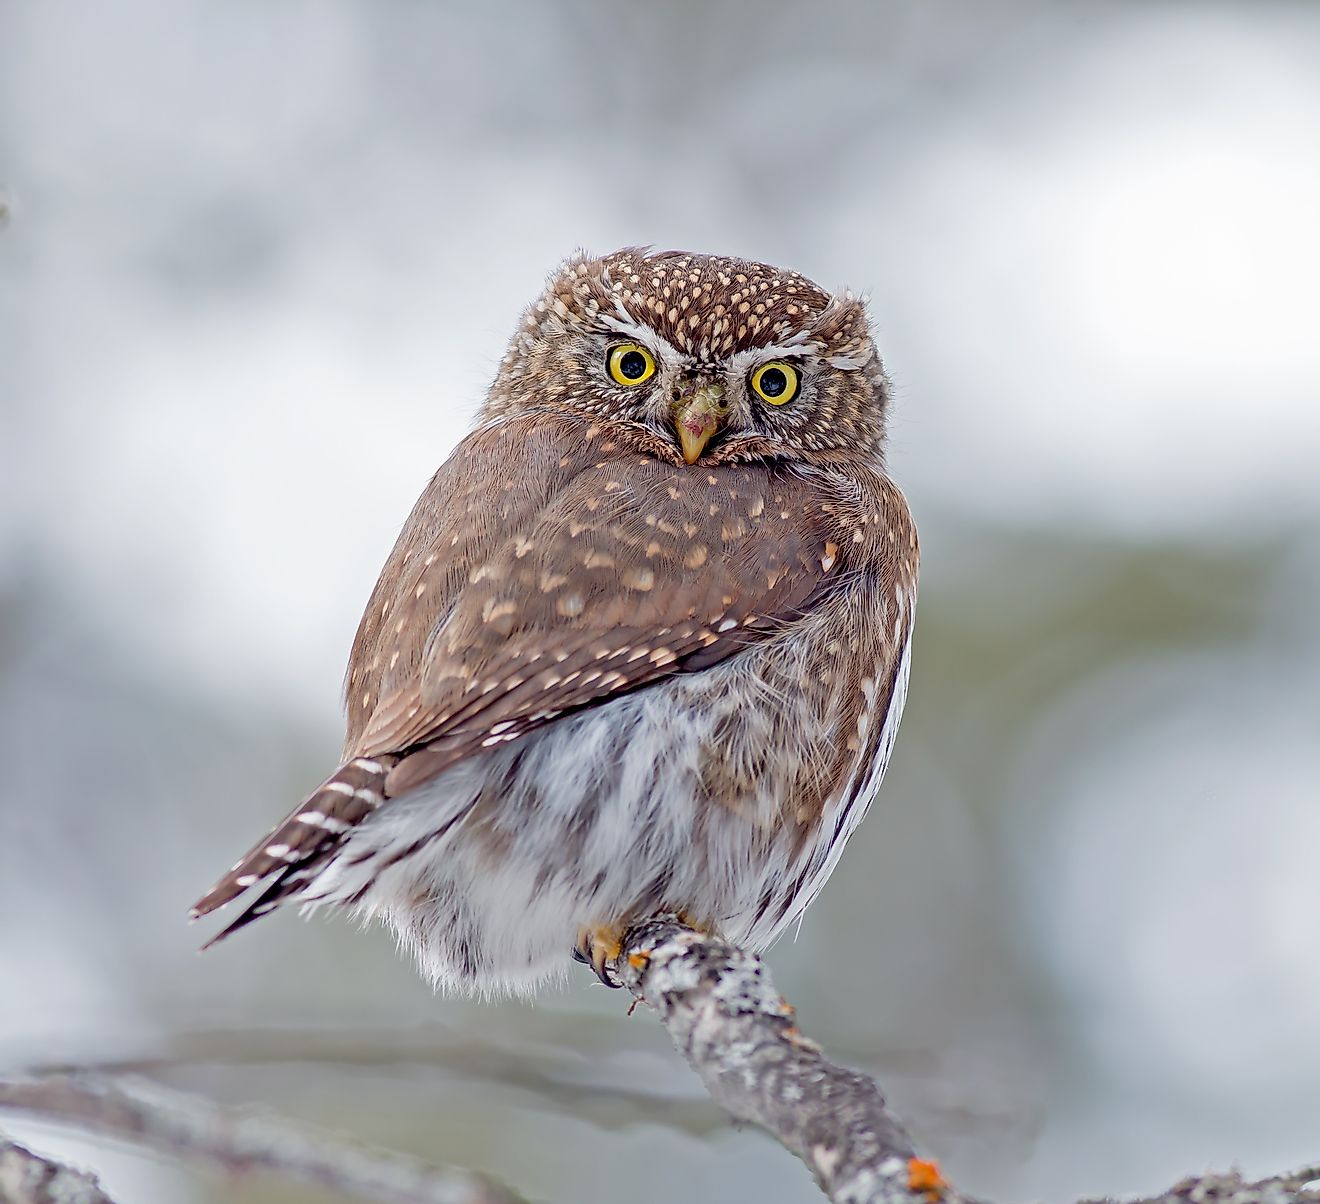 Northern Pygmy Owl is a small owl native to North and Central America.